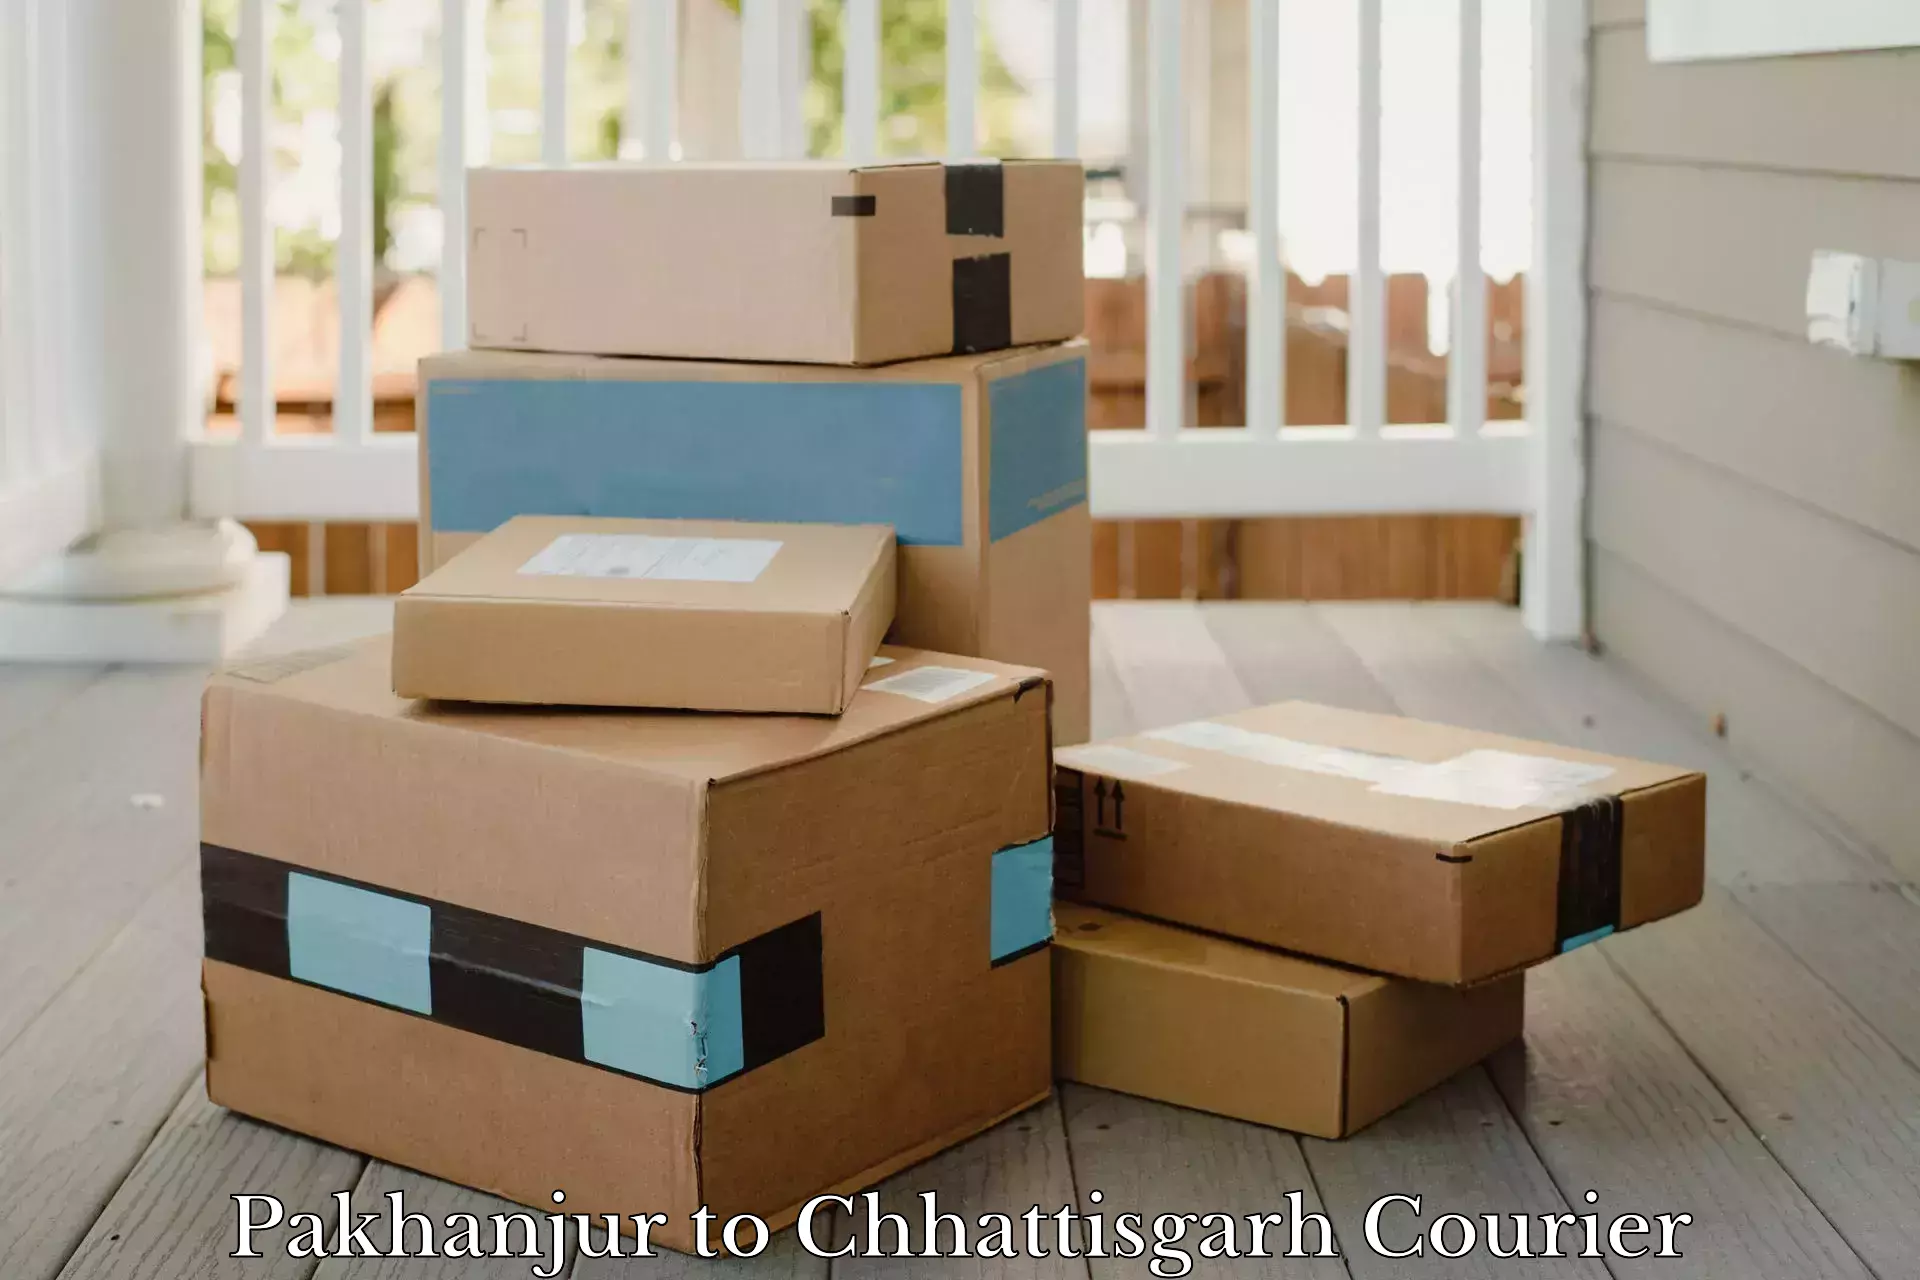 Easy access courier services in Pakhanjur to bagbahra